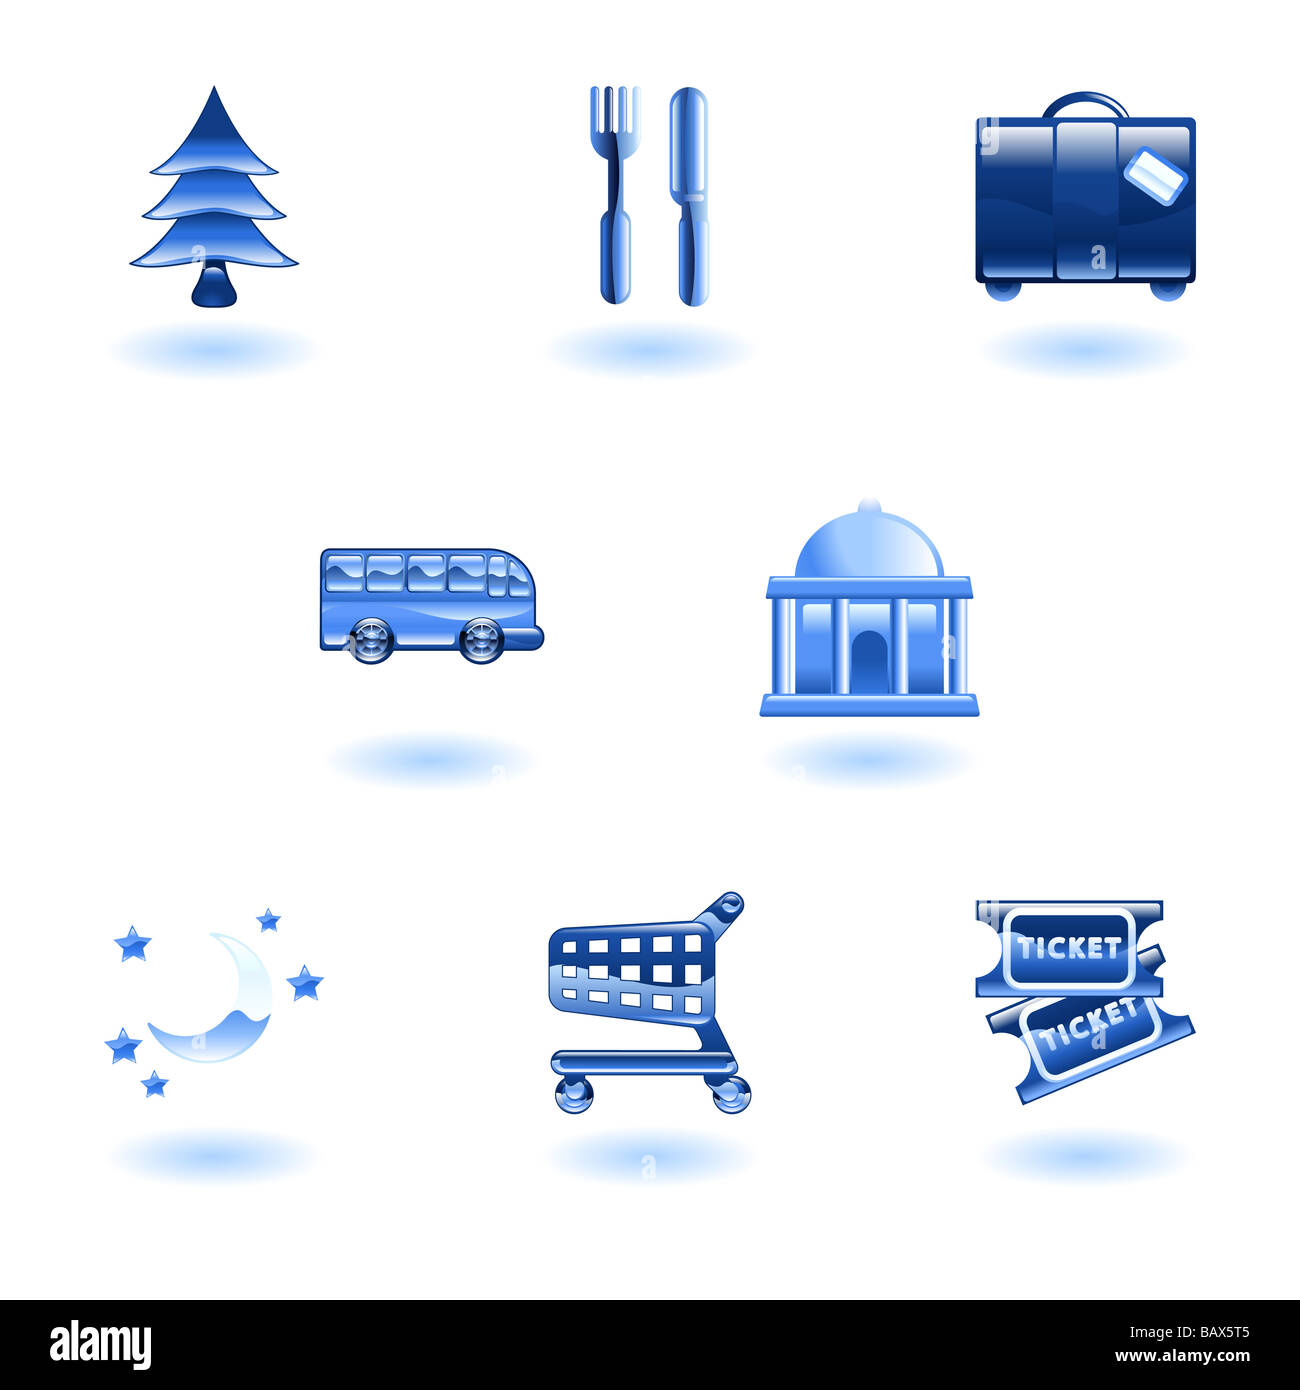 Tourist locations icon set Icon set relating to city or location information for tourist web sites or maps etc Stock Photo